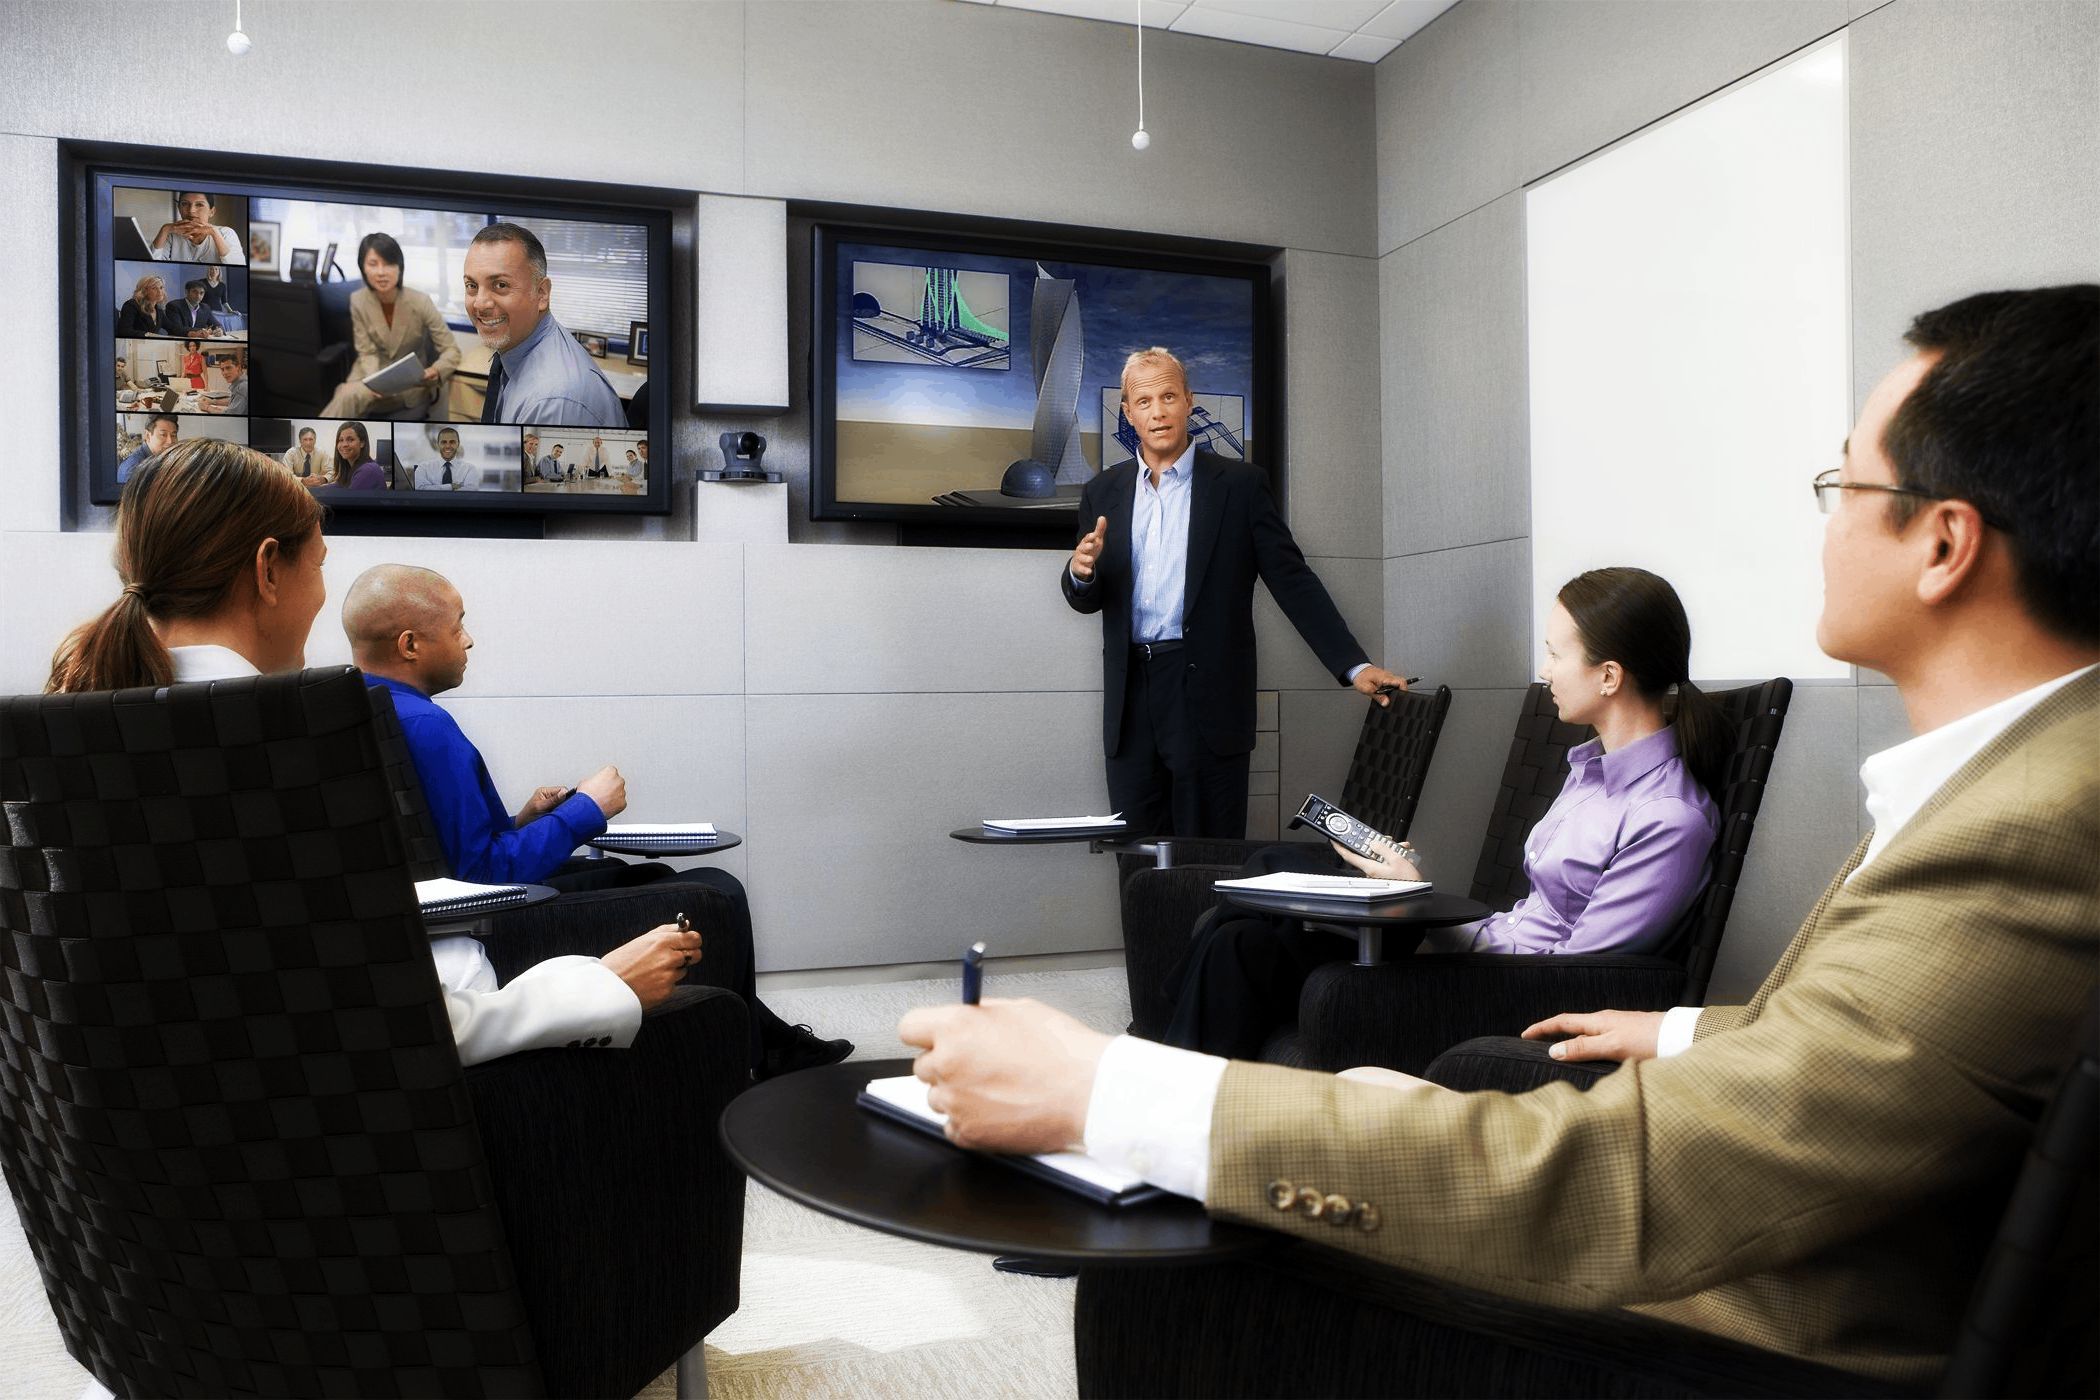 Delhi Meeting Rooms: A Guide to Effective Video Conferencing at Worldmark 2 Aerocity